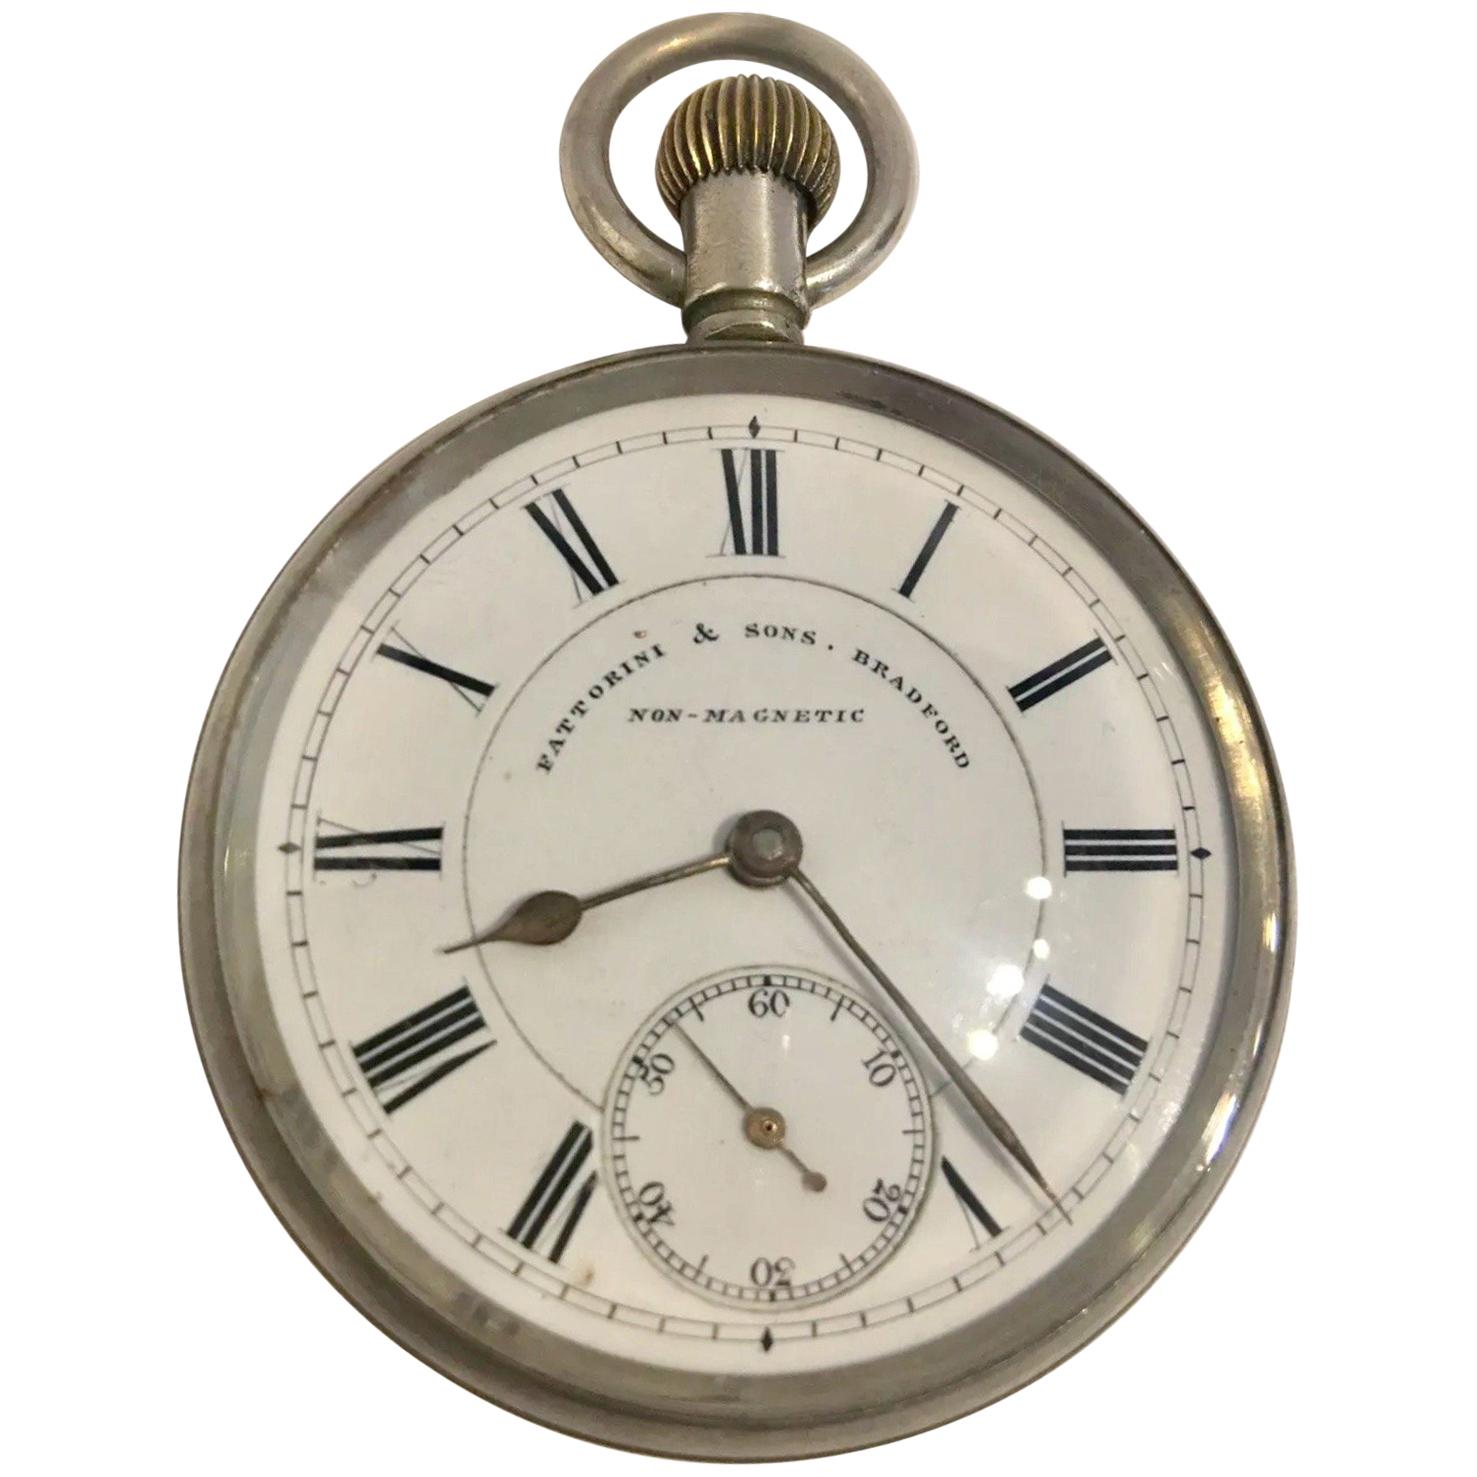 Antique Waltham Mass Pocket Watch Signed Fattorini & Sons, Bradford Non Magnetic For Sale